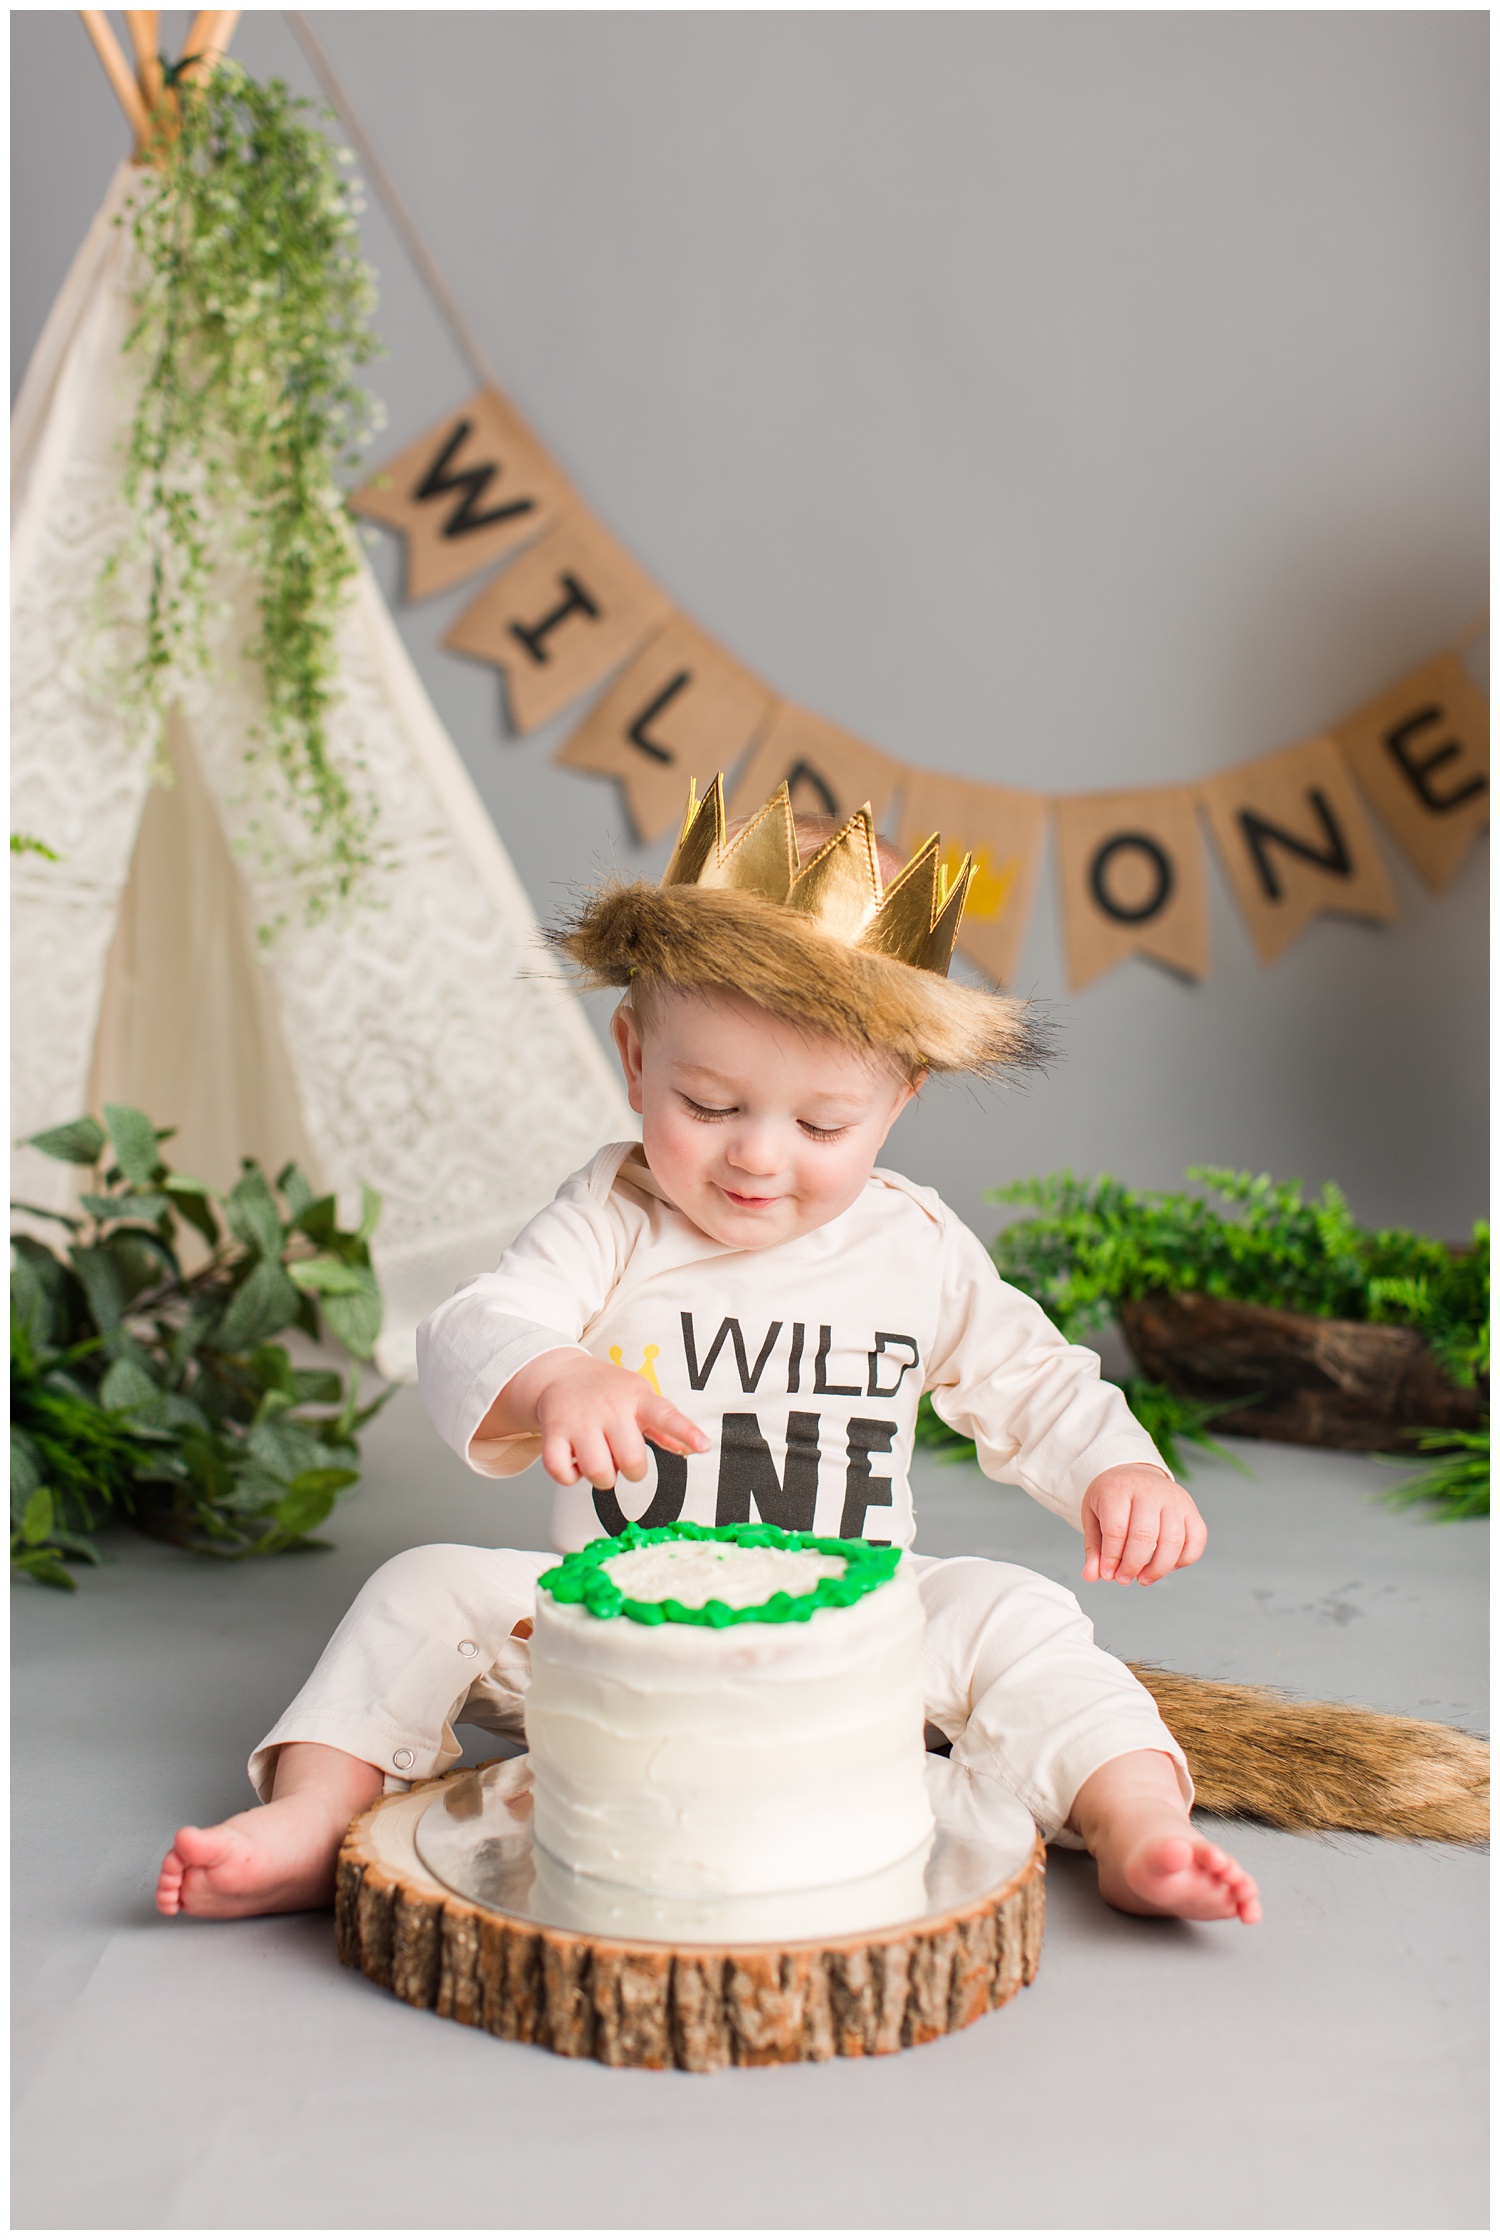 Baby Cullen poses for Where The Wild Things Are themed cake smash photoshoot.